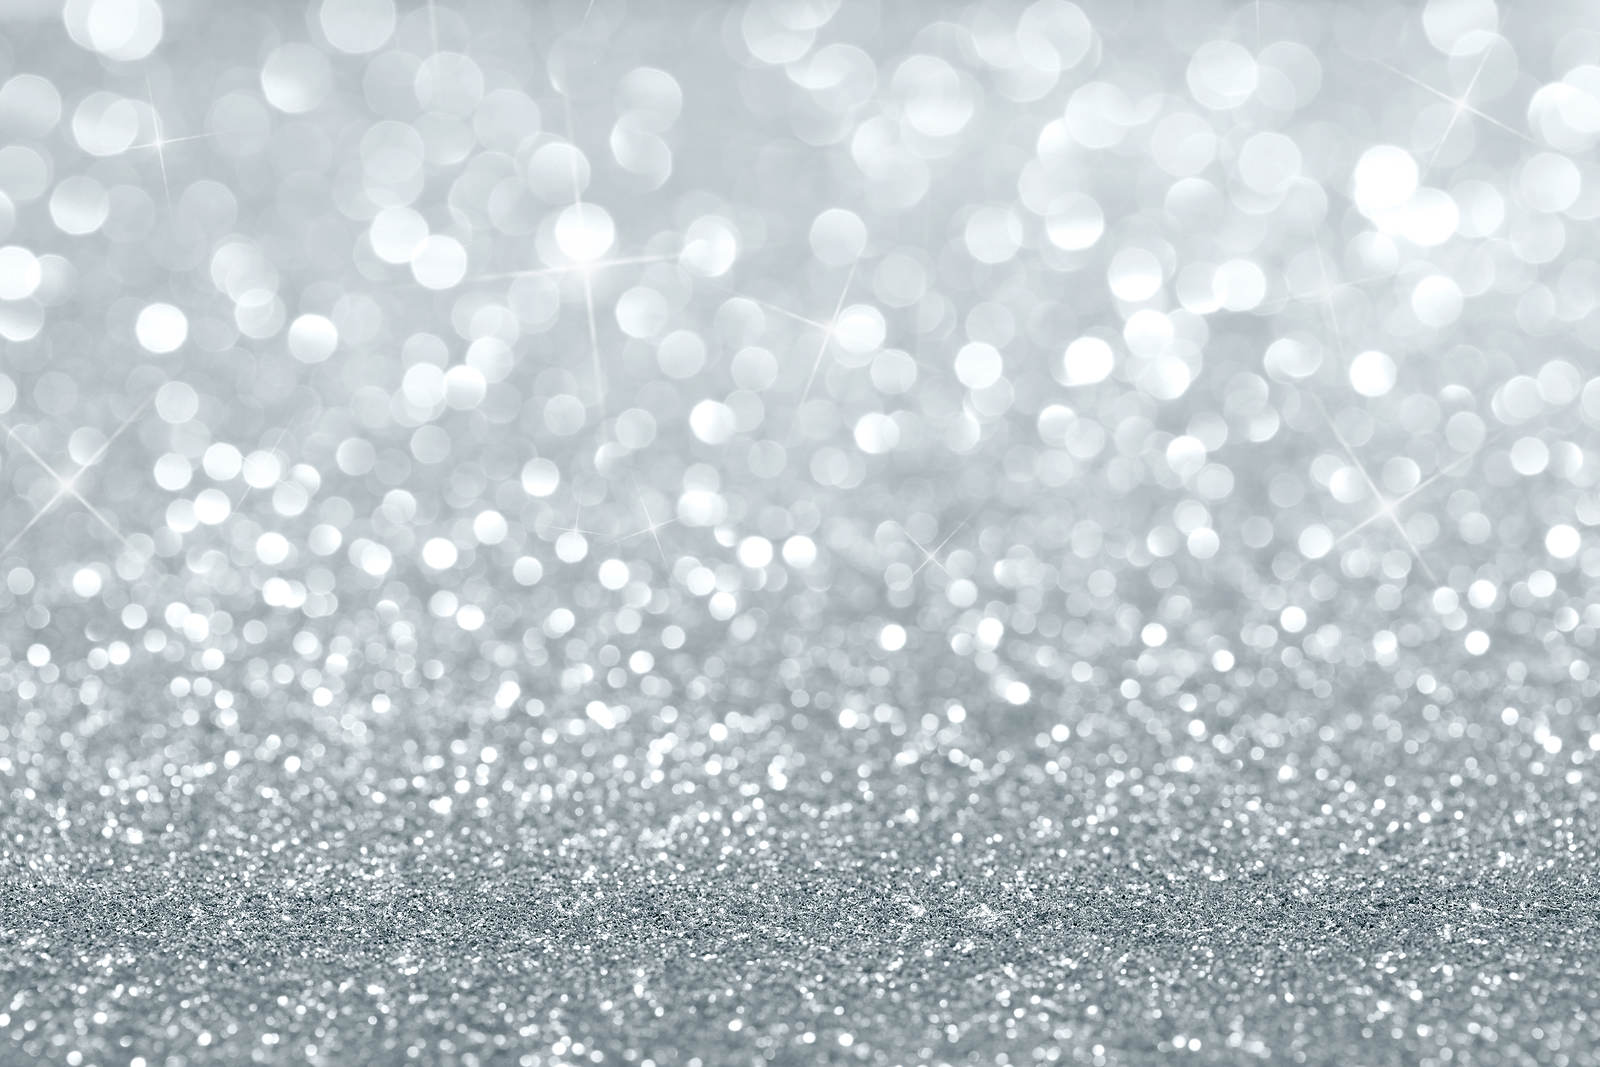  Silver Glitter Backgrounds Wallpapers FreeCreatives